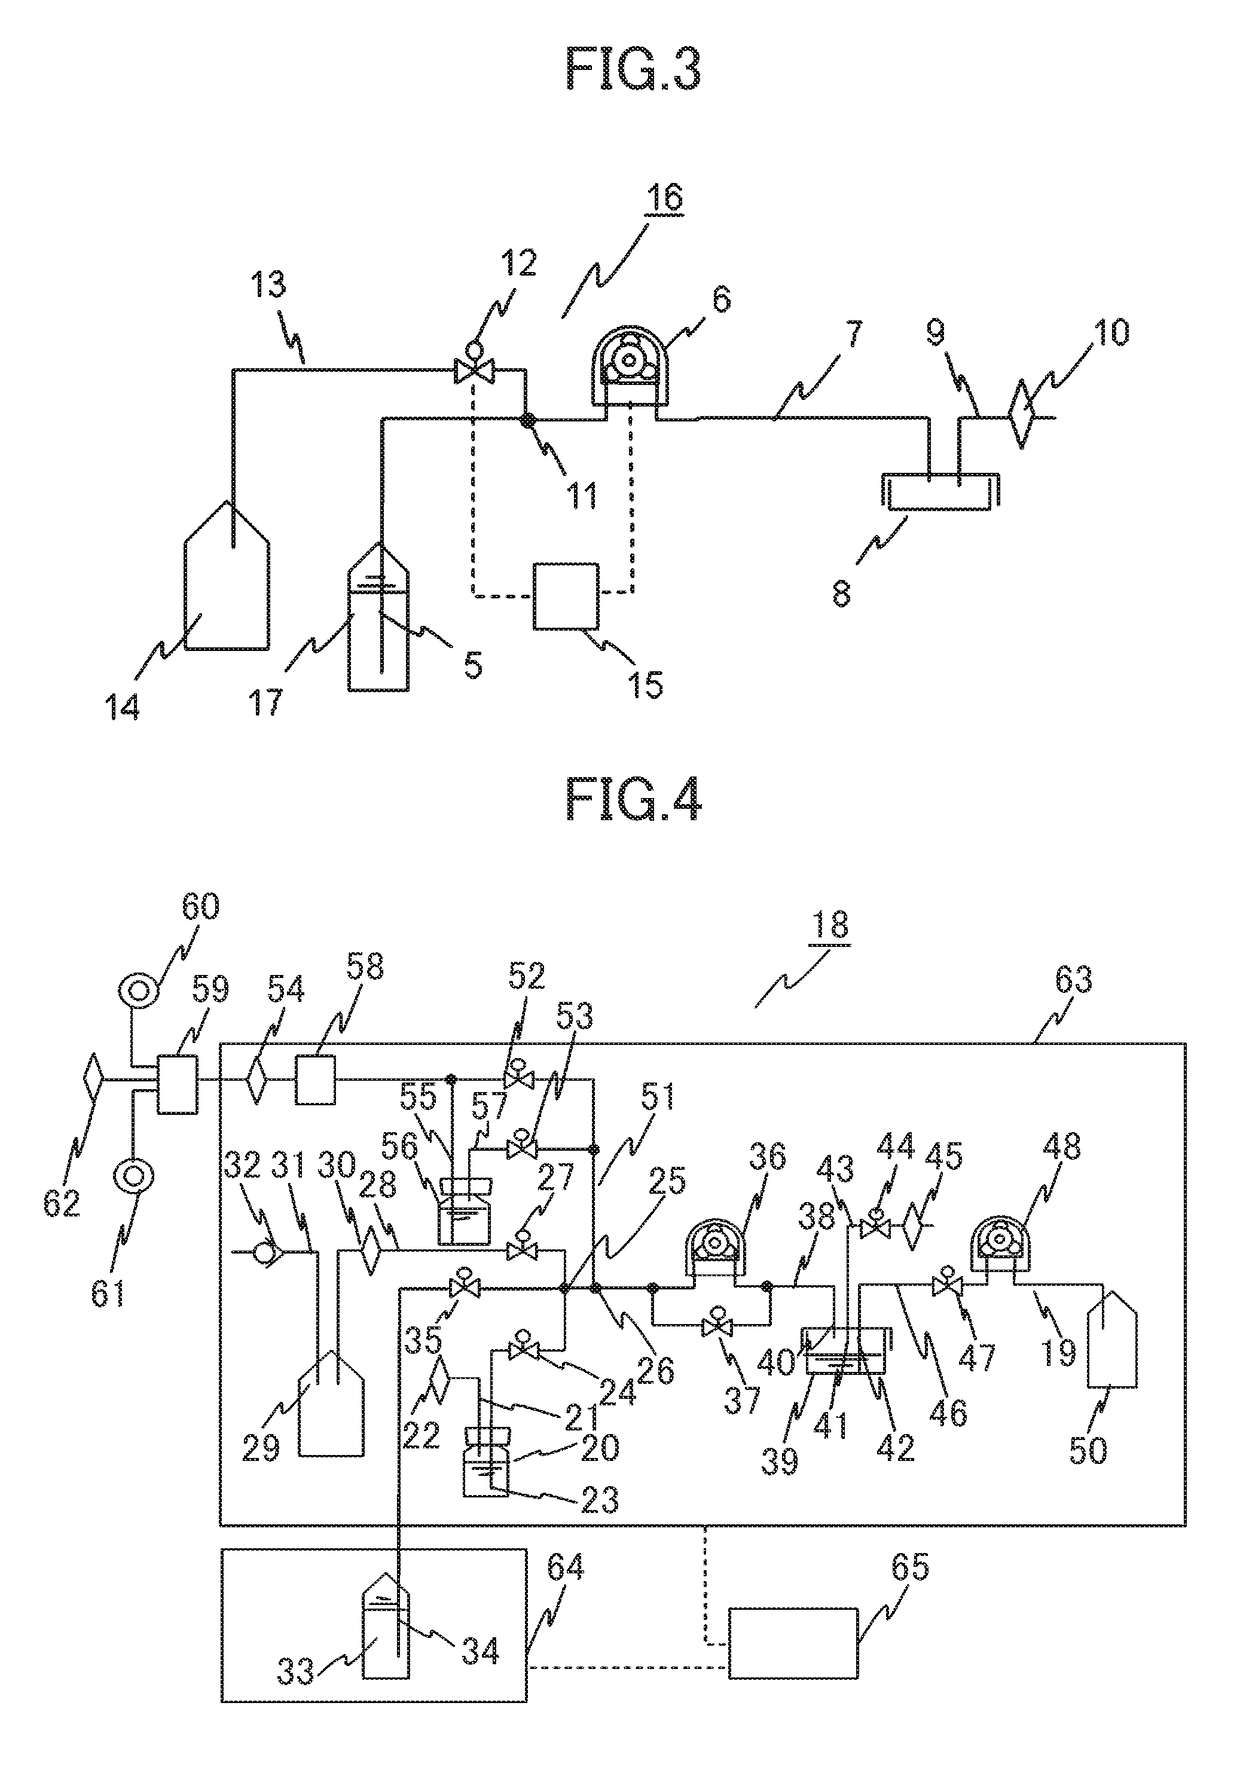 Liquid feeding device and cell culture device